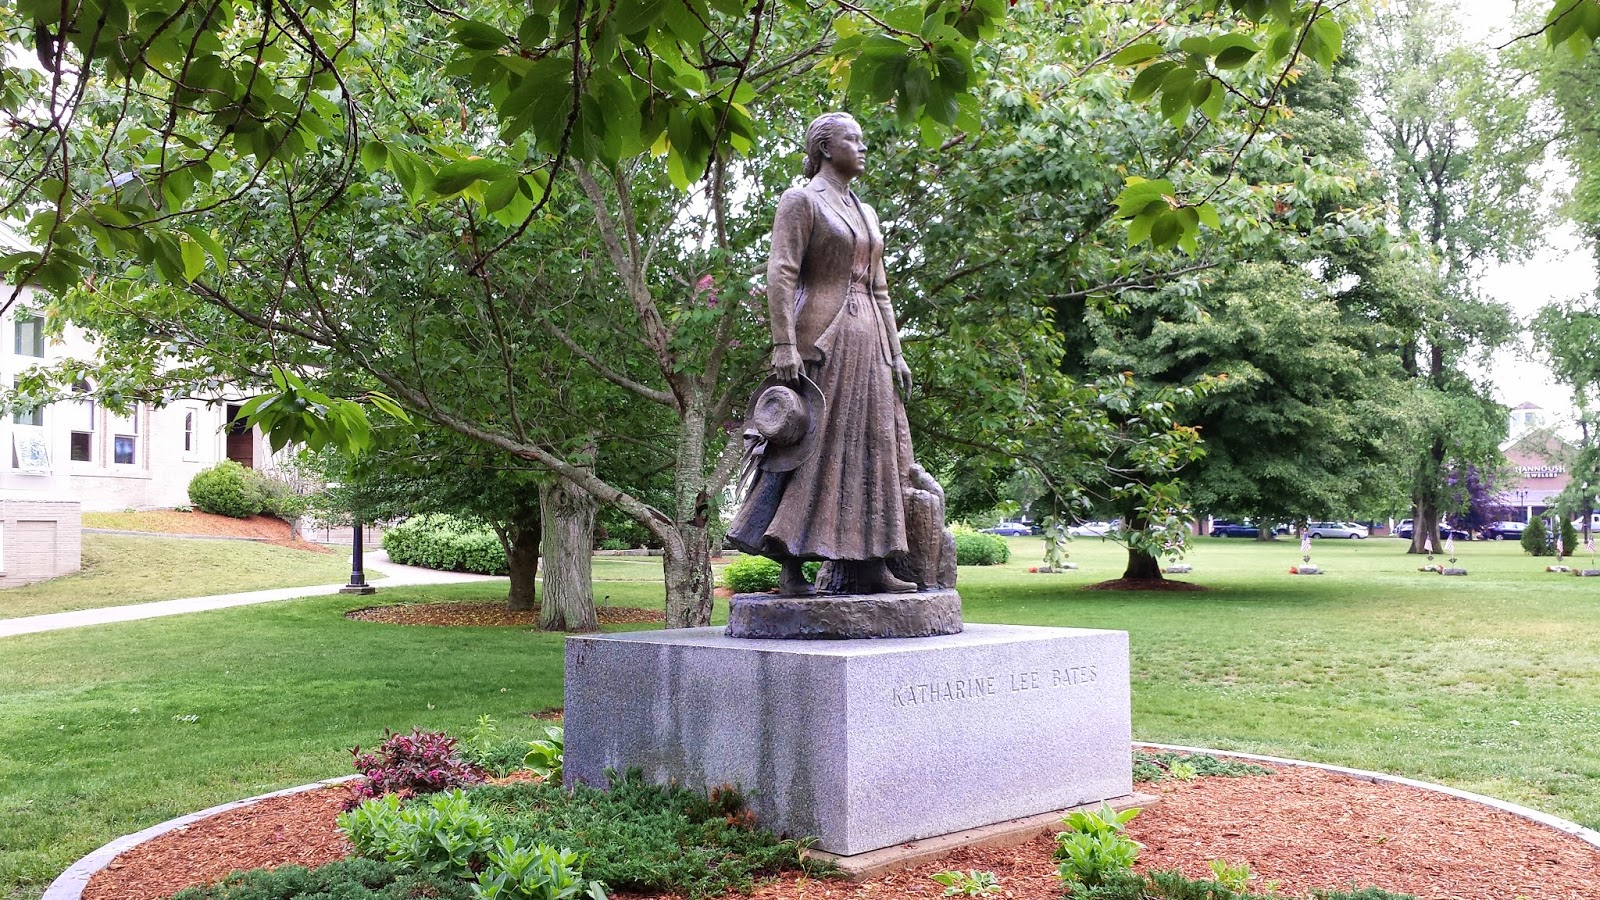 Public Art and Memory: Katherine Lee Bates in Falmouth, Massachusetts